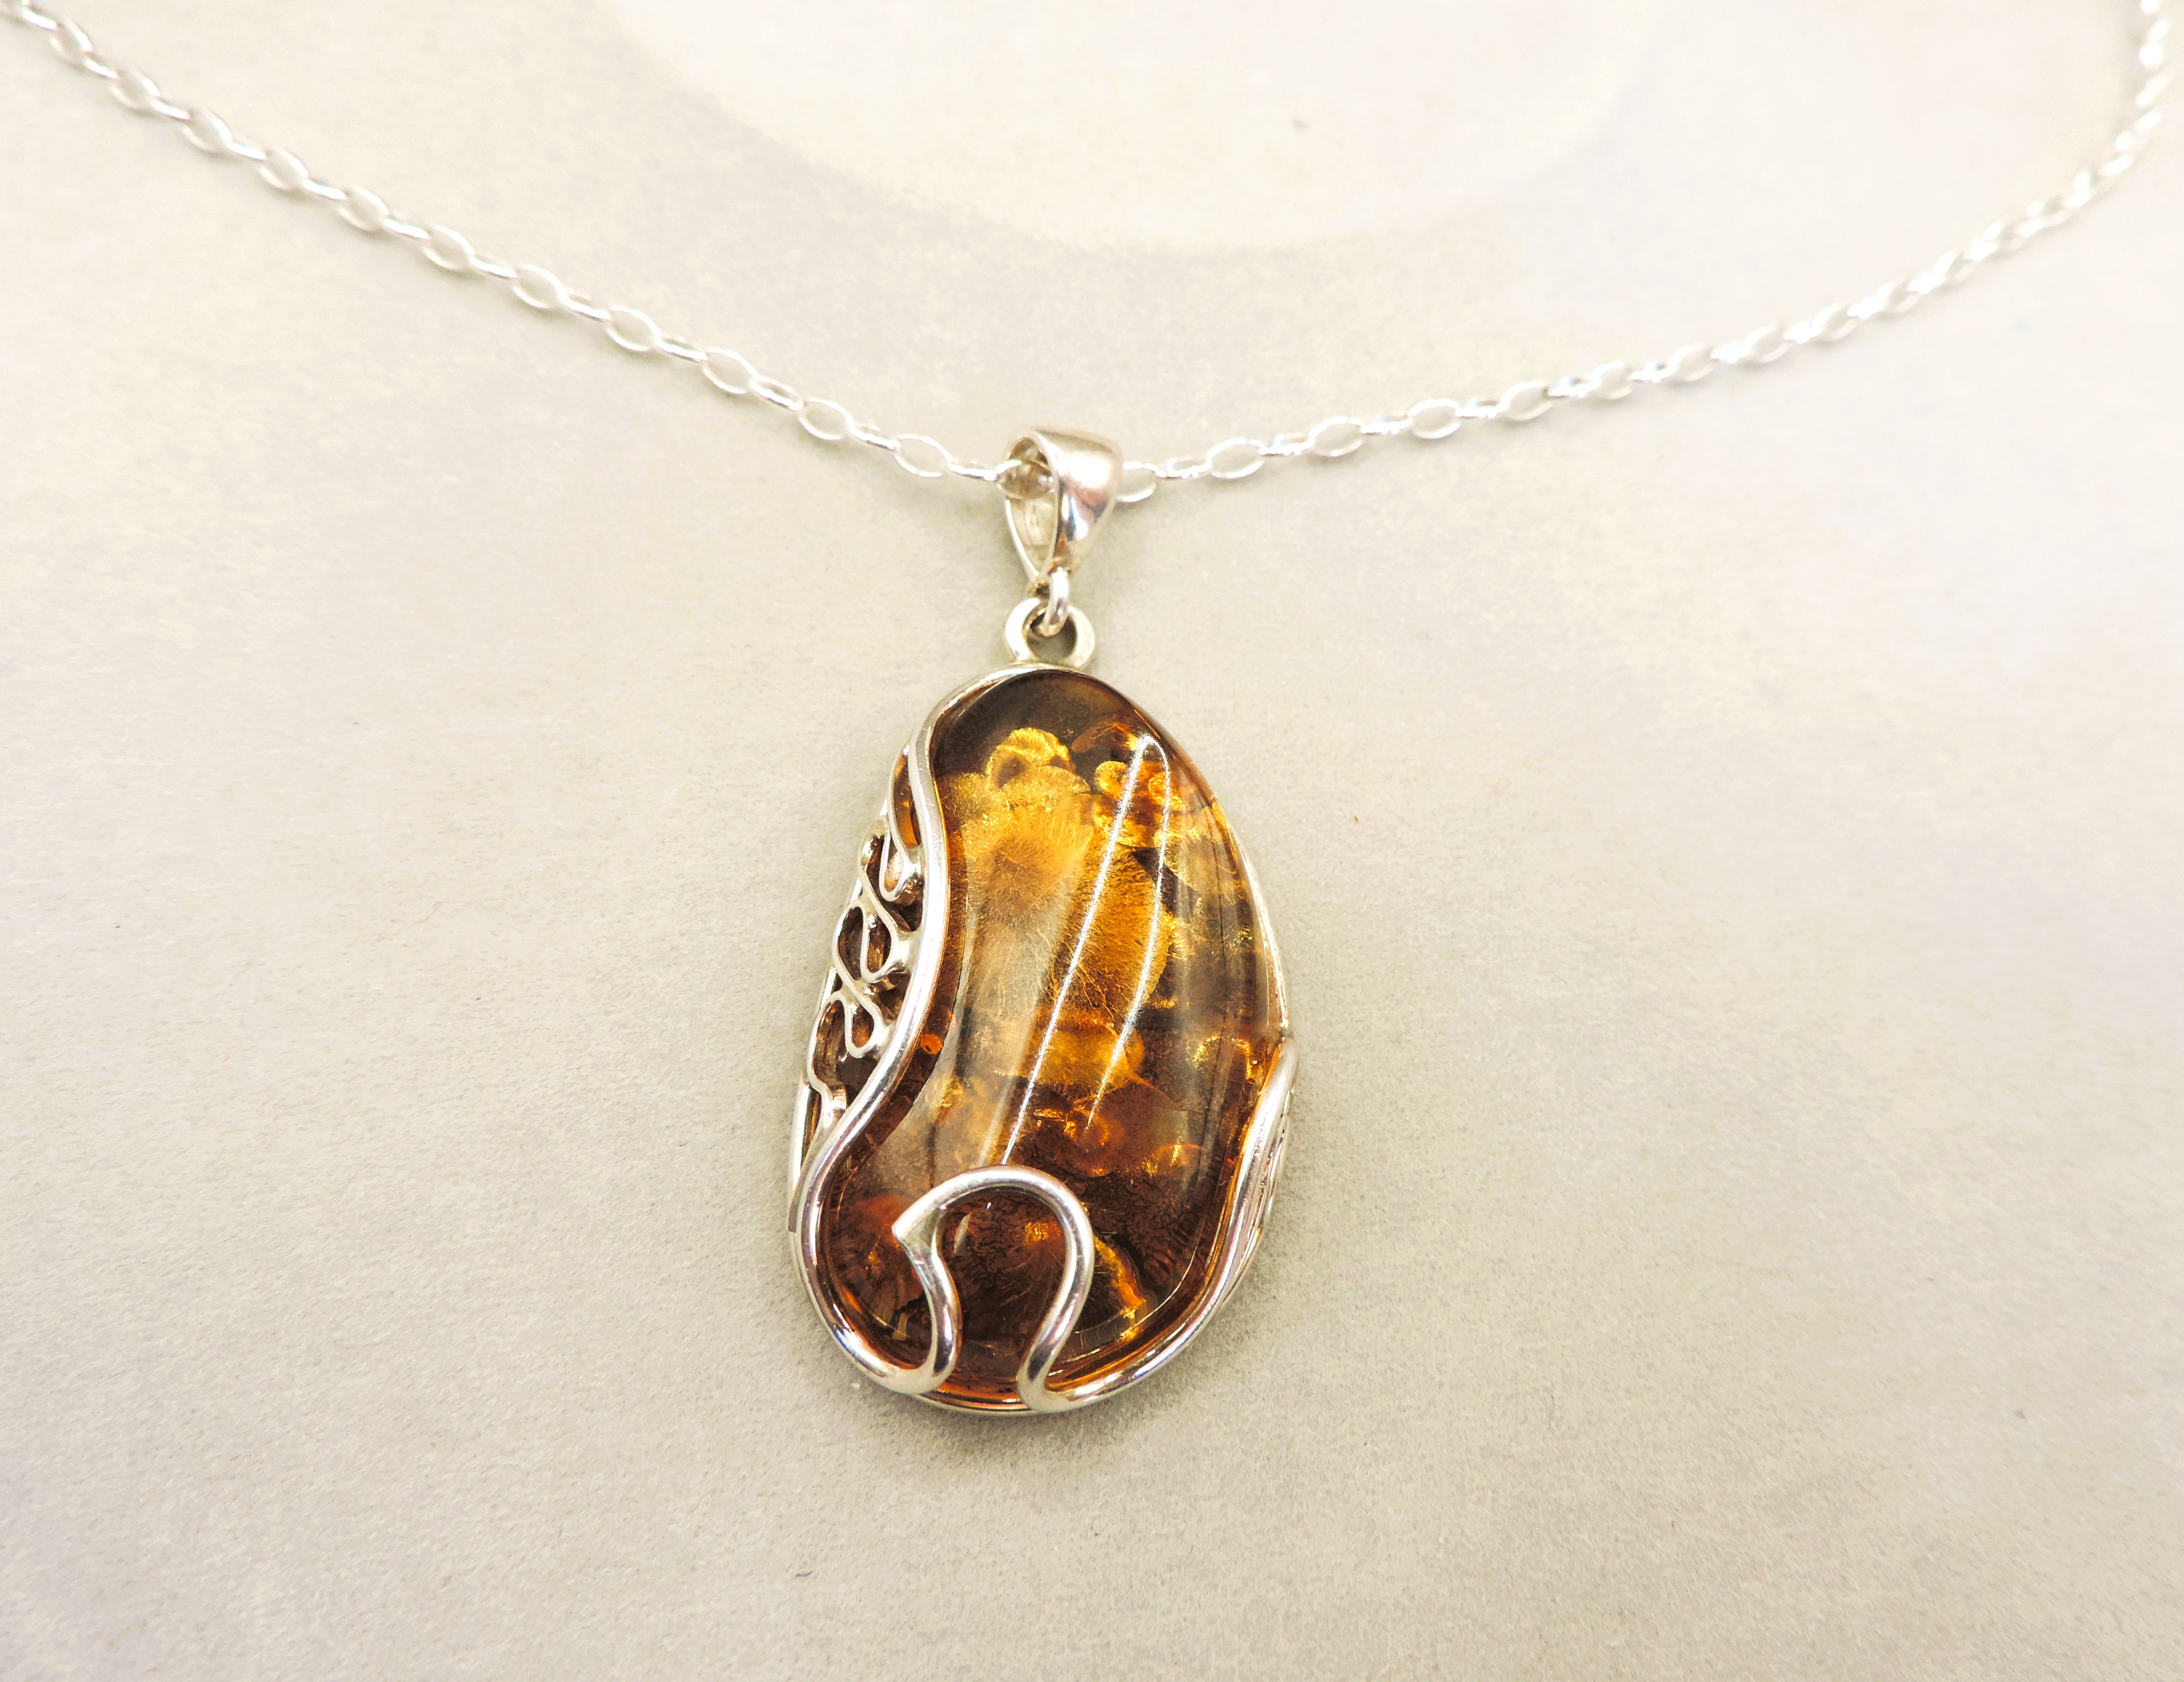 Artisan Sterling Silver Amber Pendant Necklace With Gift Box - Image 4 of 4